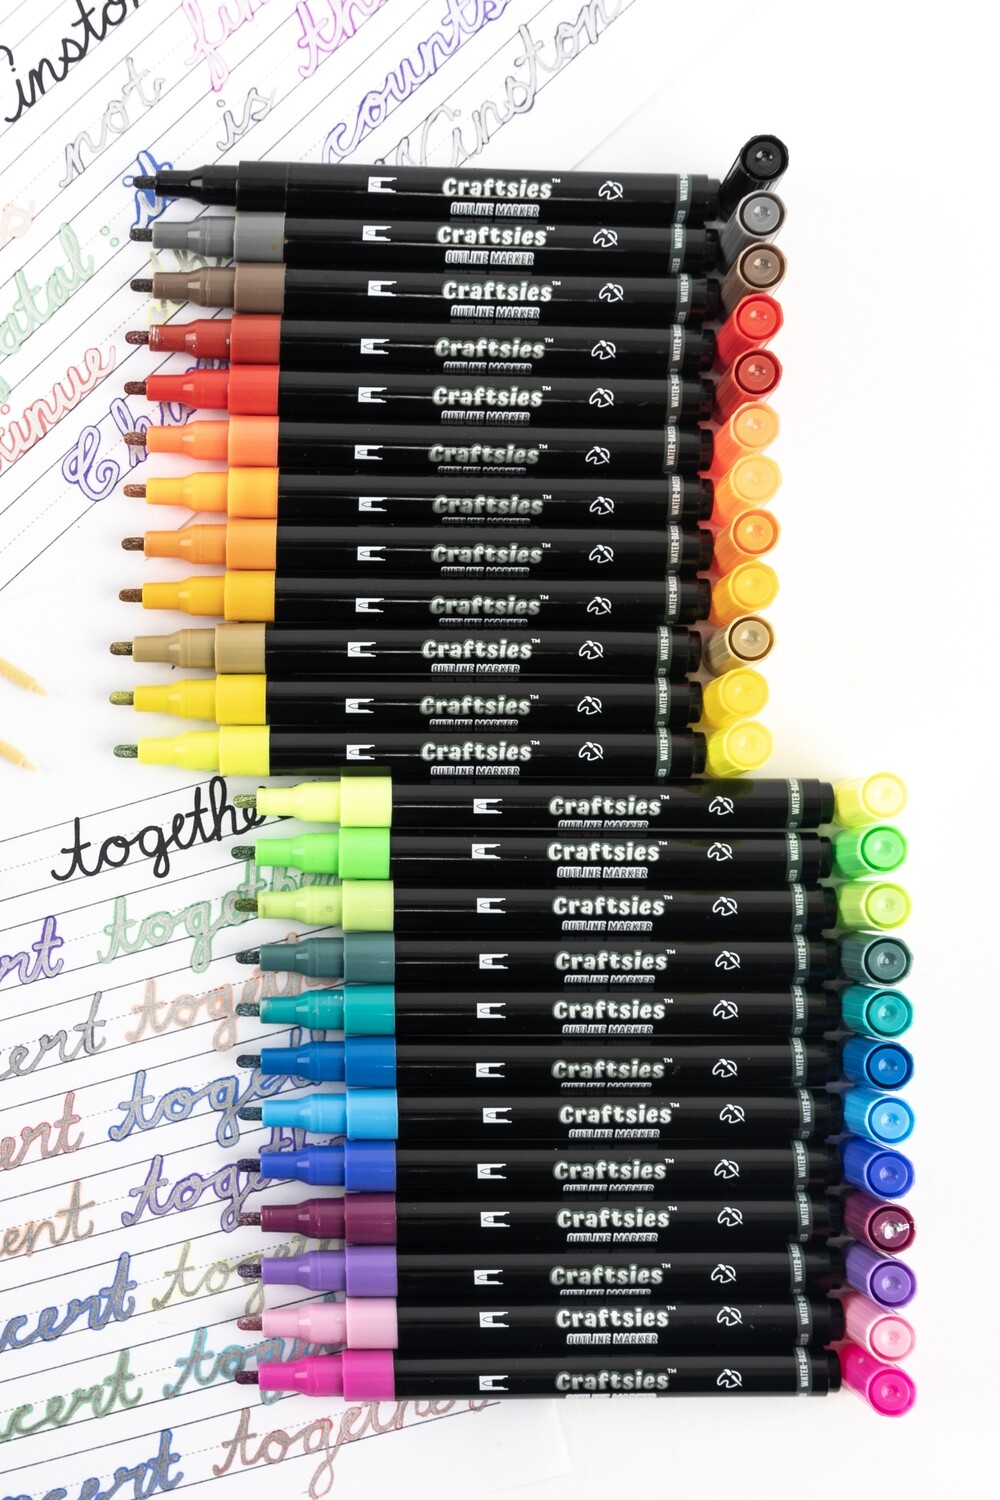 Cool Craftsies Double line Metallic Outline Markers Set|24 Dazzle Self-Outline Doodle Markers| 2 extra tips Plus Super Cursive Writing Squiggles Course| 1mm Premium Fine Tip for Doodlers